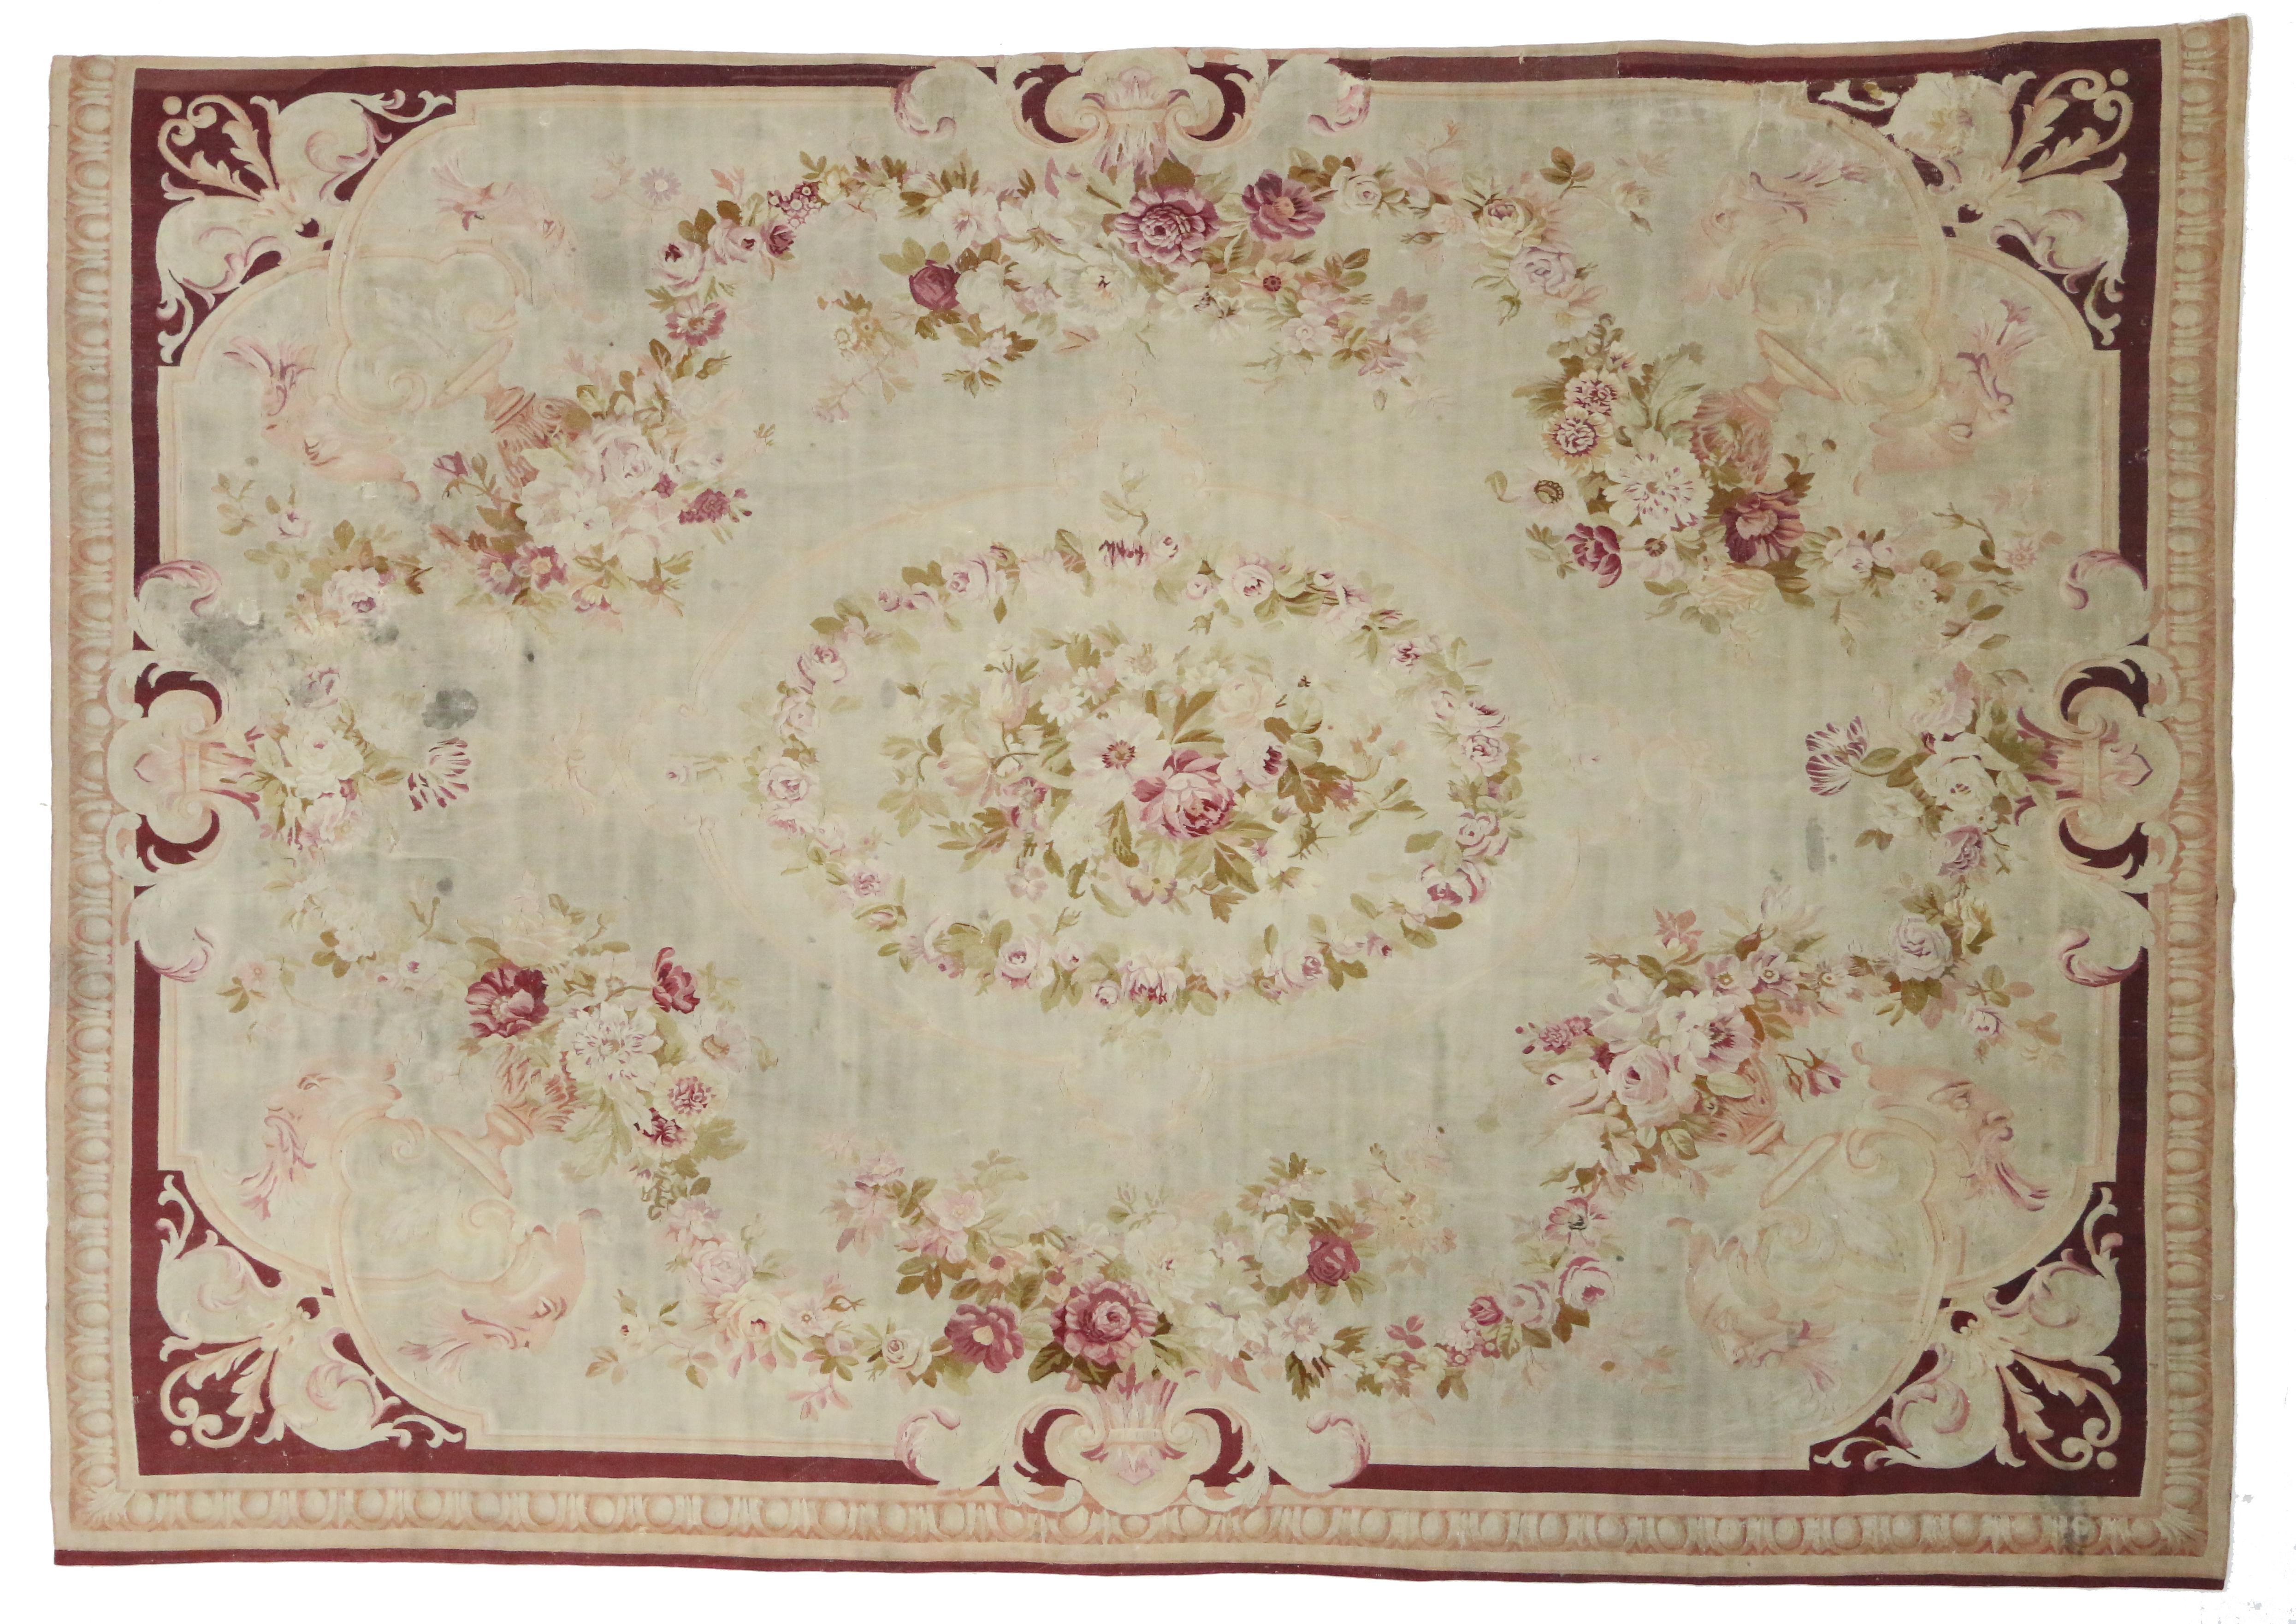 76740 Late 19th Century French Romanticism Antique Aubusson Rug. Say Oui as you feast your eyes upon this late 19th century French Romanticism antique Aubusson rug. This late 19th century rug is characterized by designs customary for Aubusson